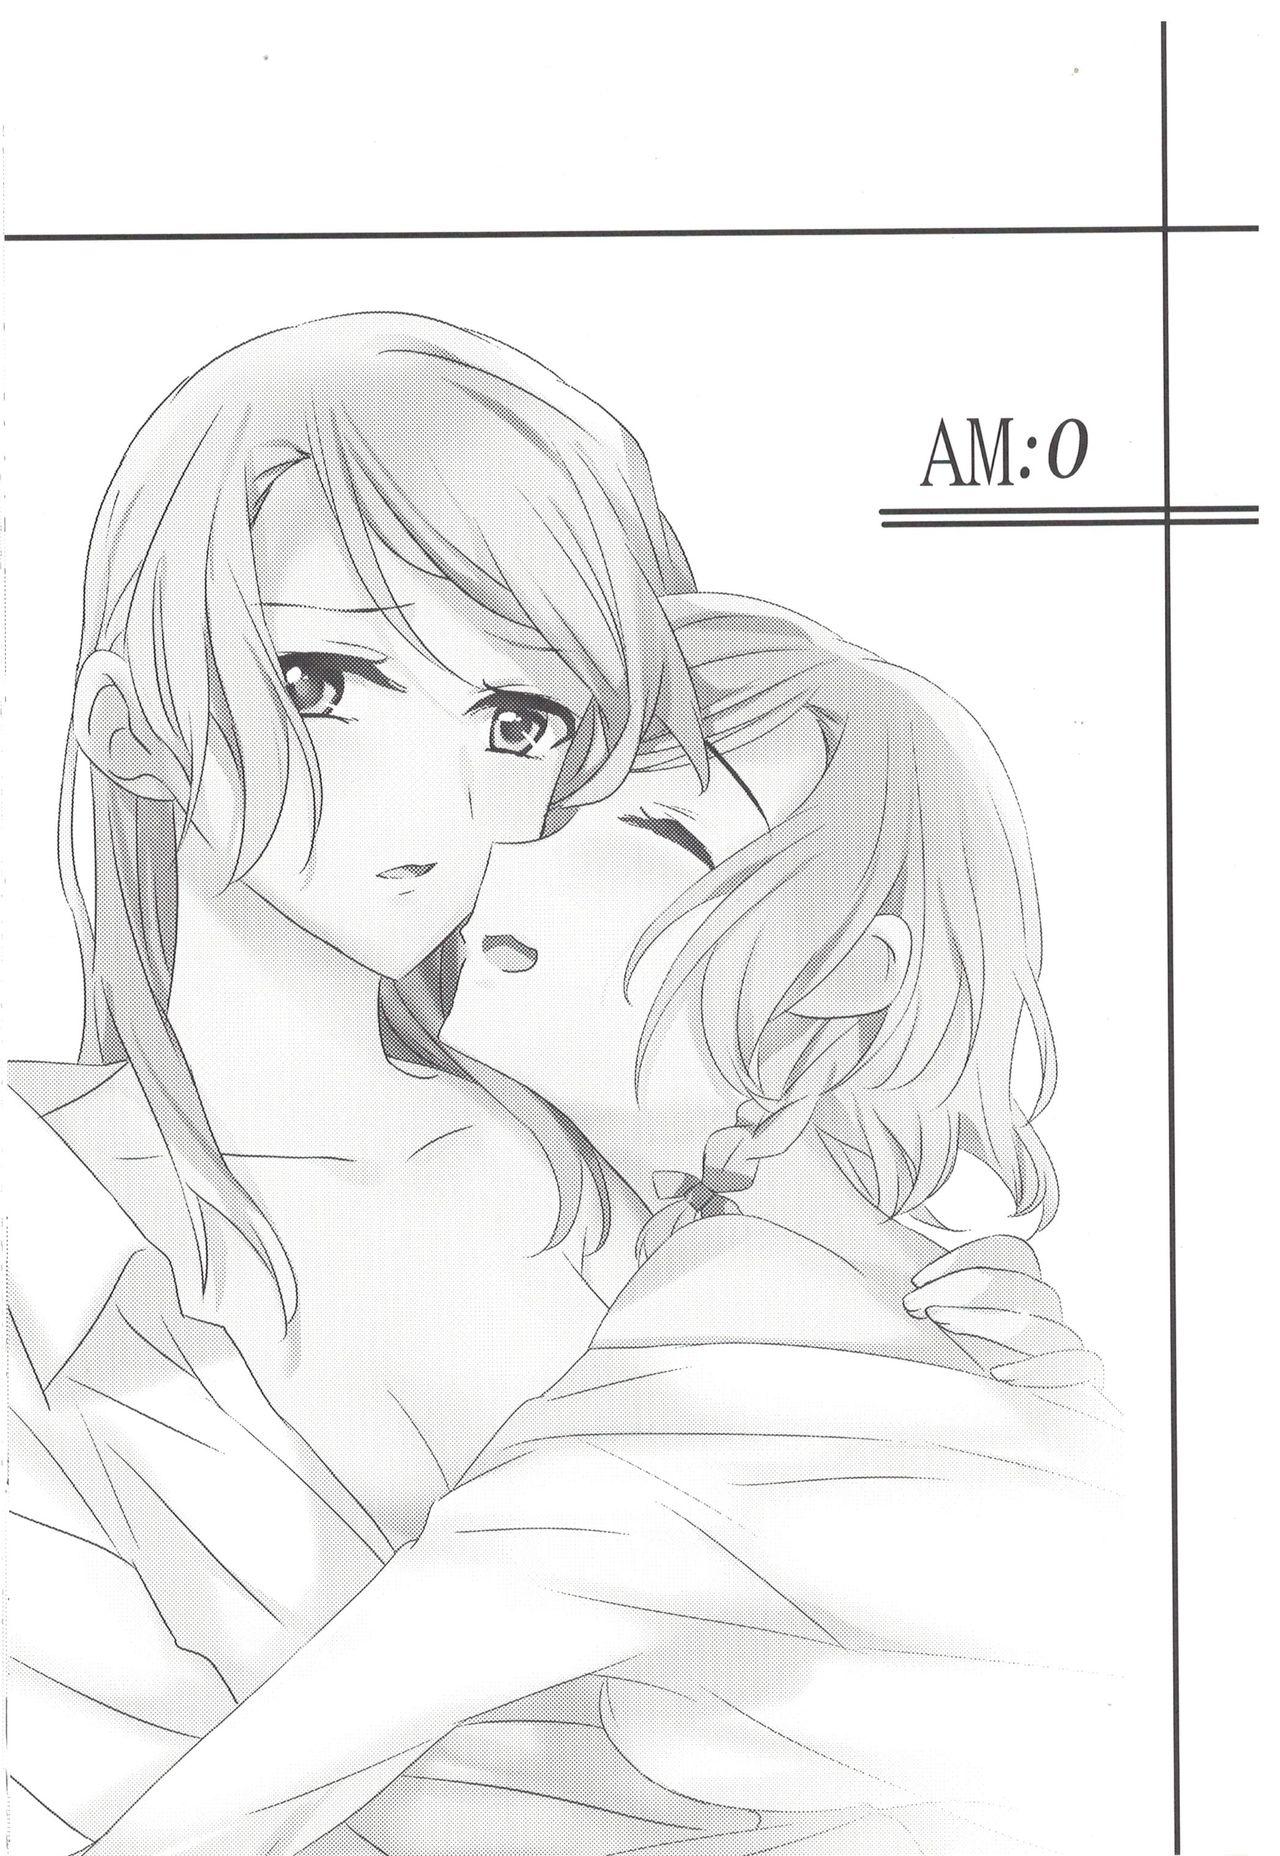 Ass To Mouth AM:0 - Bang dream Aunt - Page 2